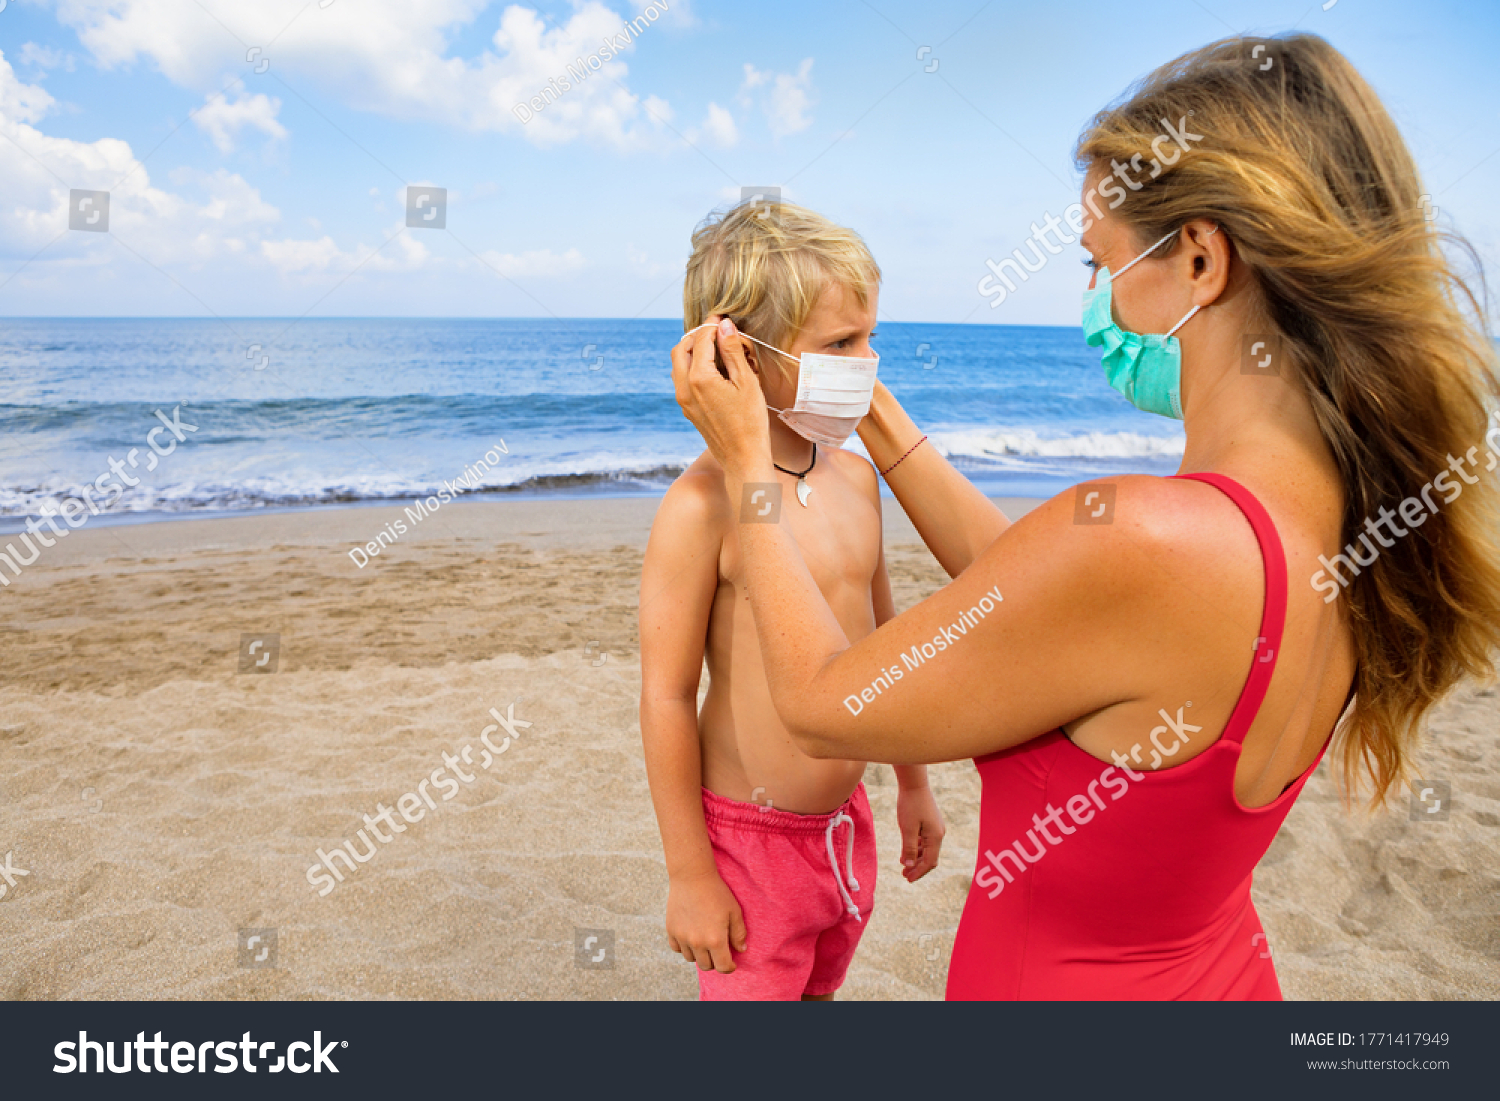 Mother put medical mask on child on sea beach. New rules to wear cloth face covering at public places. Cancelled cruise, tour due coronavirus COVID 19. Family vacation, travel lifestyle at summer 2020 #1771417949